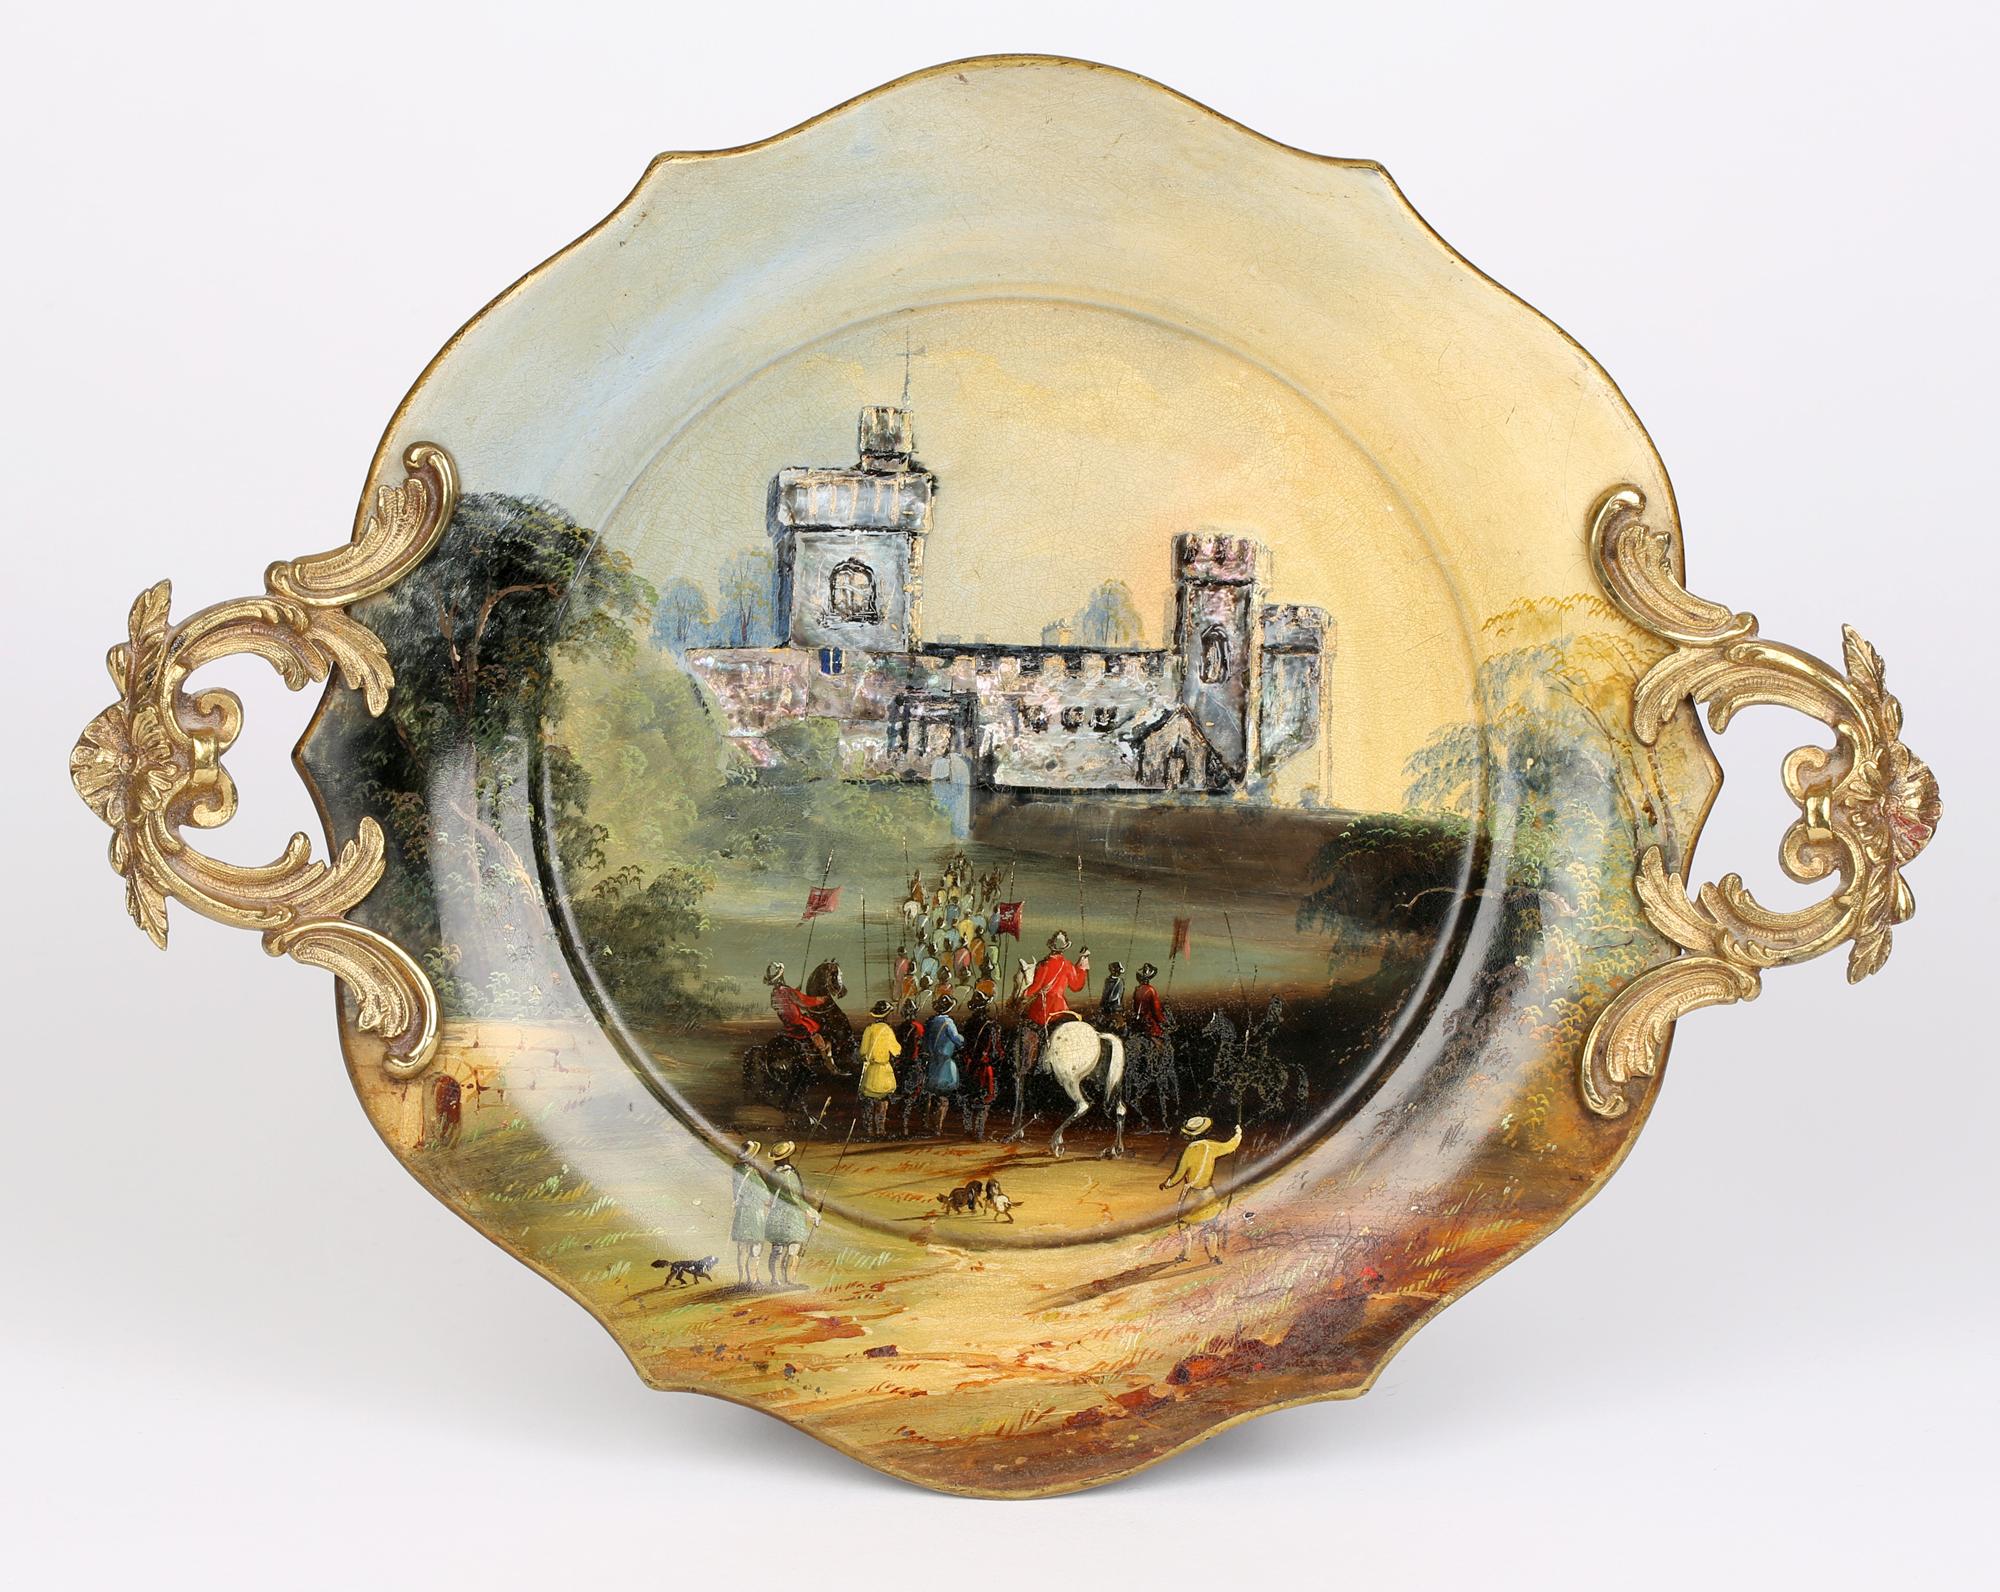 An exceptional Victorian hand painted and lacquered papier mache twin handled tray dating from around 1850. The rounded tray has a shaped rim with ornate brass rococo handles applied to either side. The tray is hand painted with castle in a